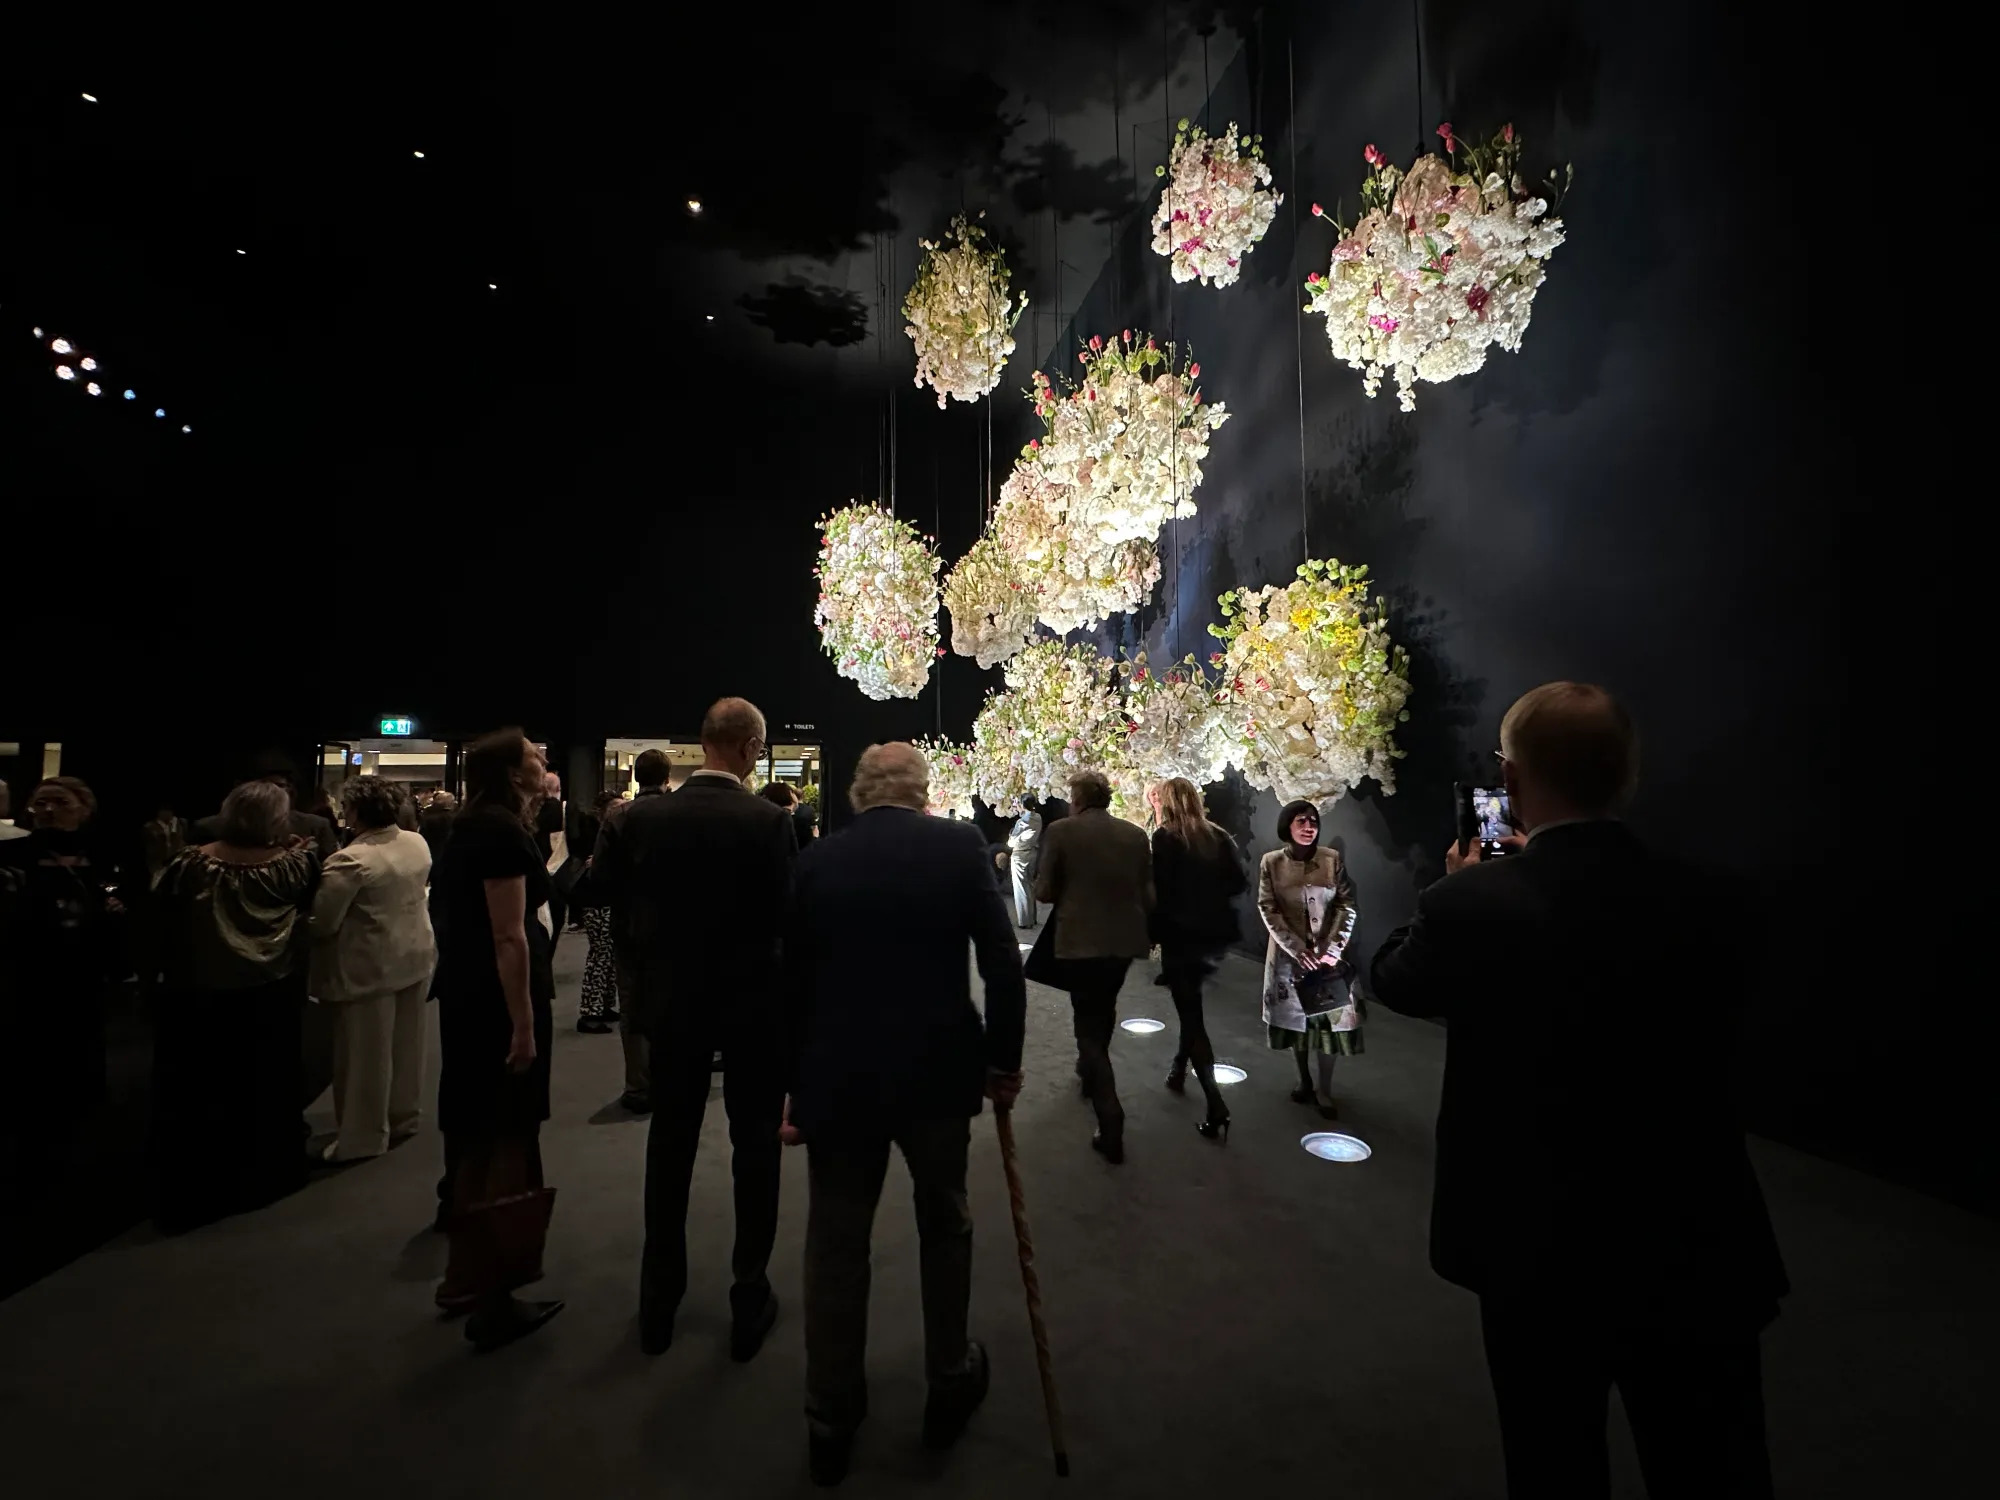 People admire the flowers that hang at the entrance of The European Fine Art Fair (TEFAF).